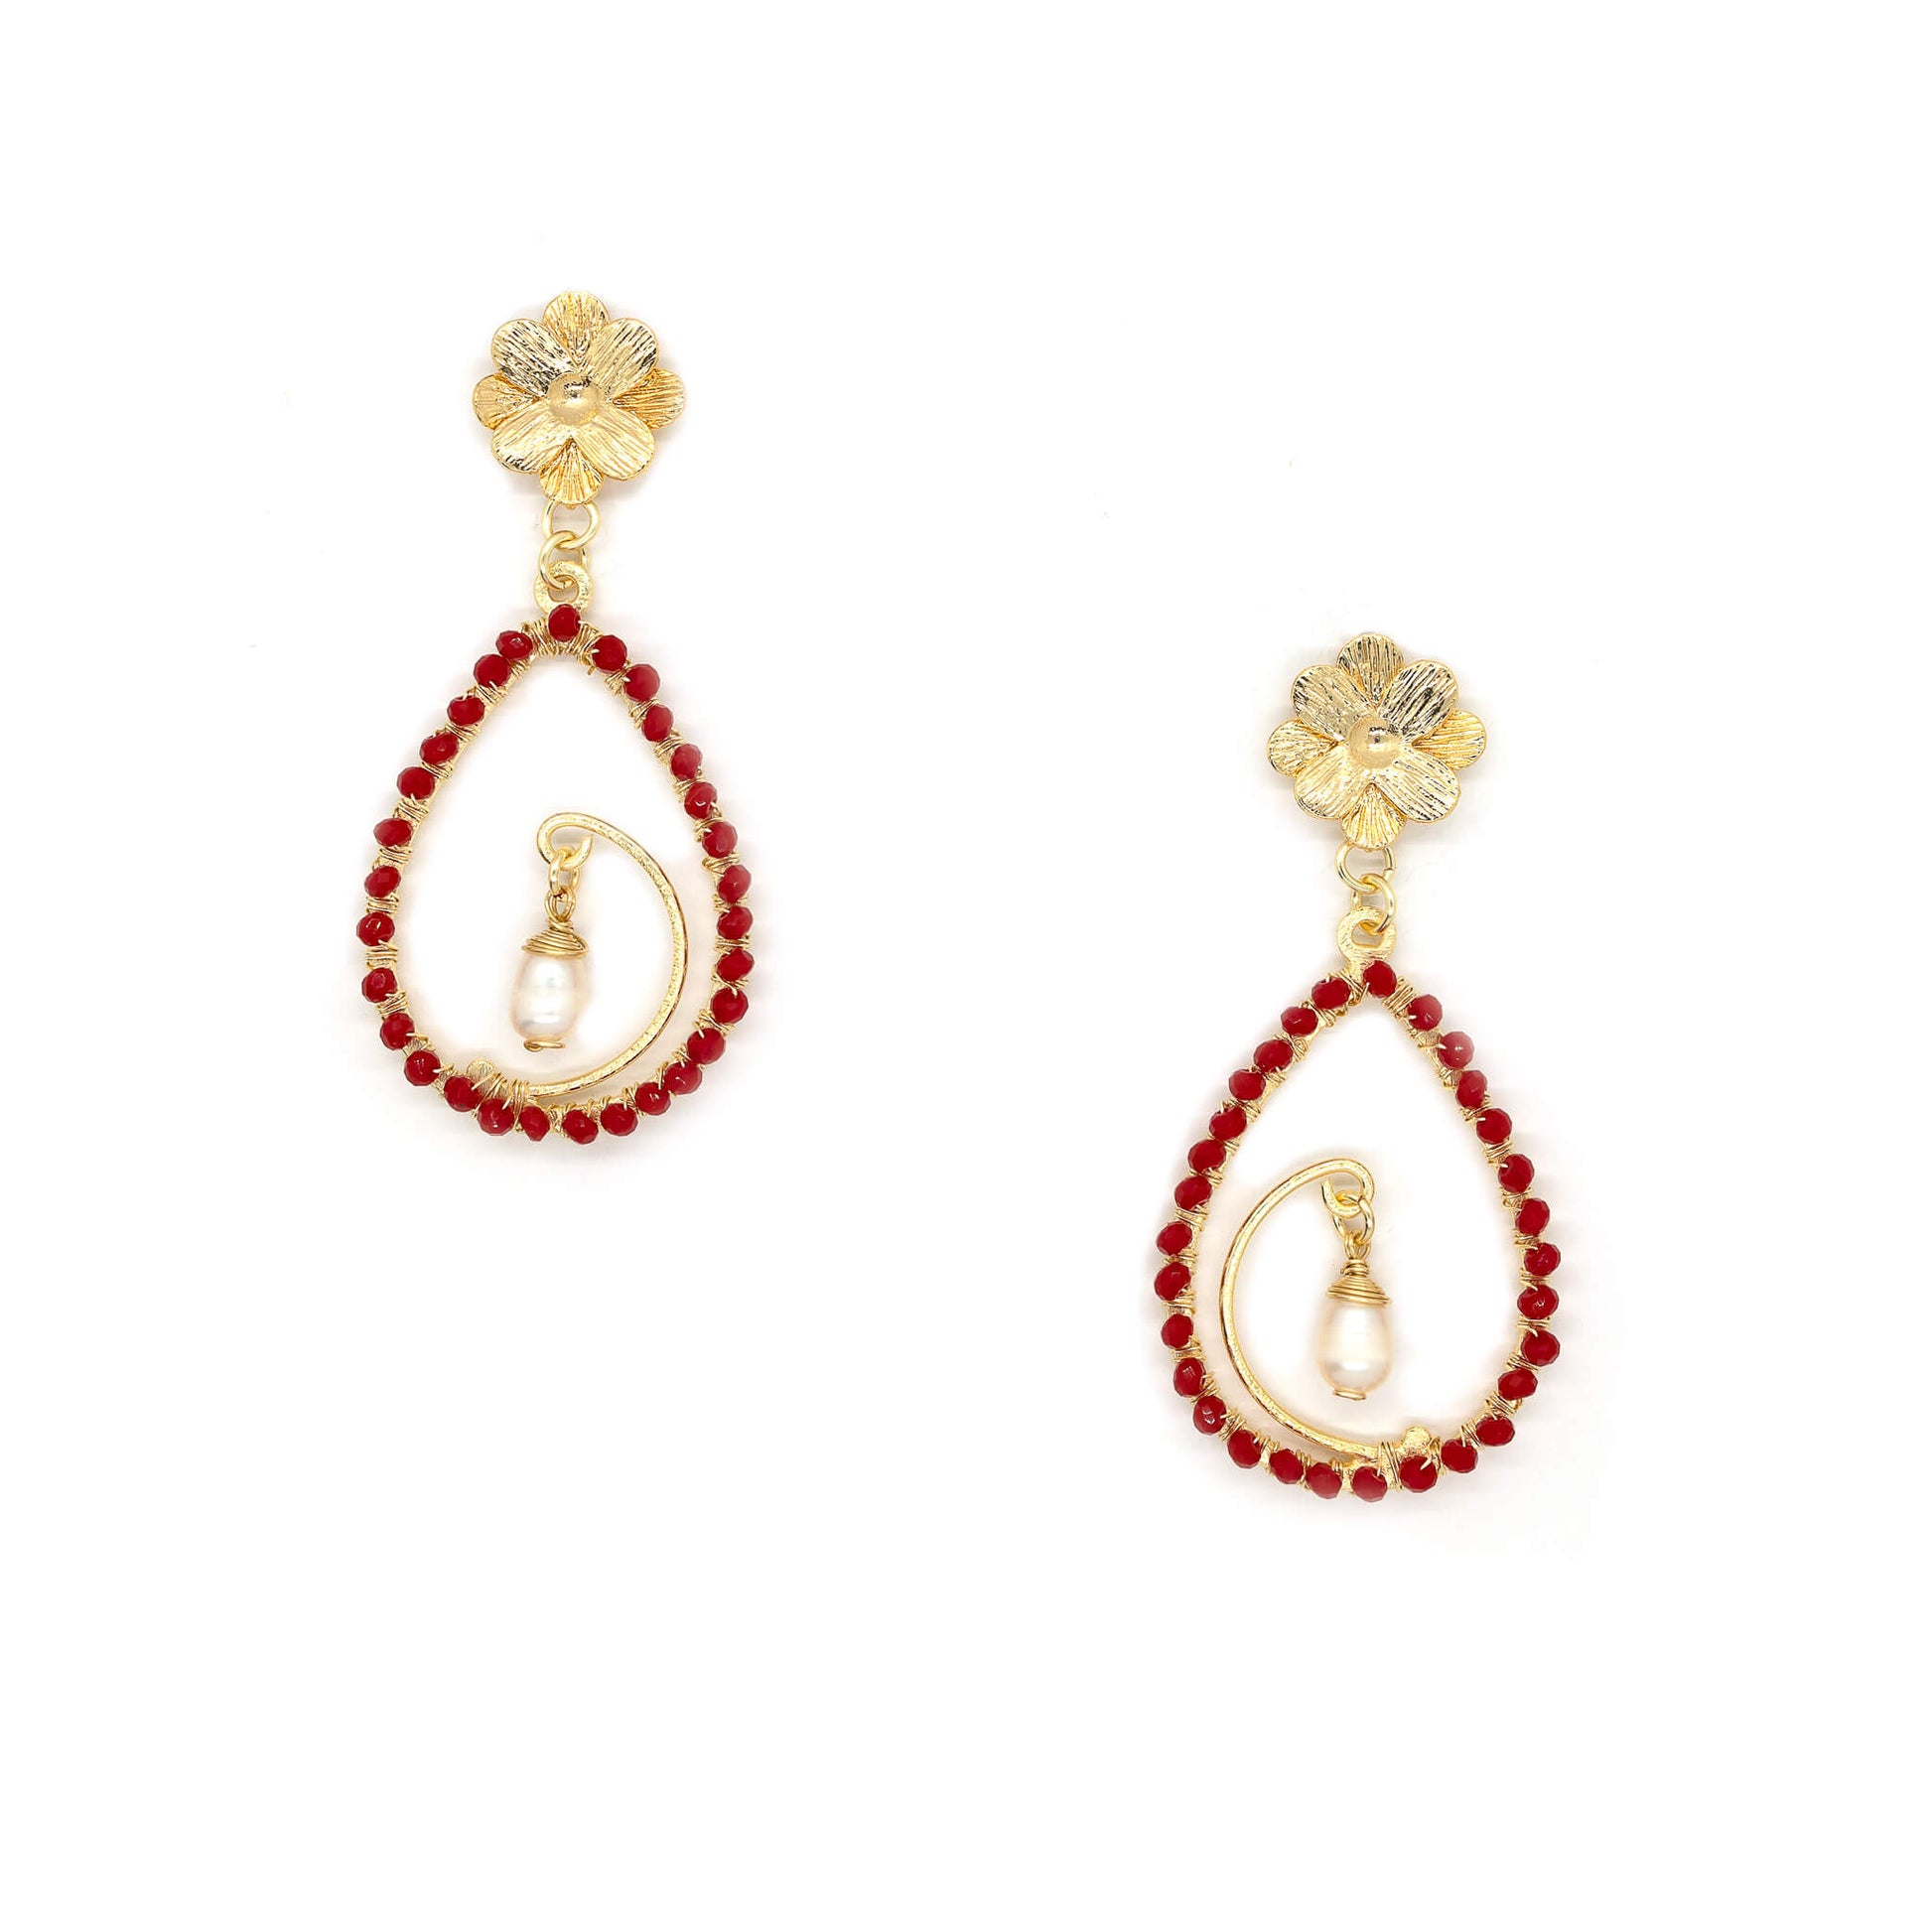 The Nadia earrings are 2.5 inches long. Gold, white and red earrings. These Beaded Teardrop Earrings are Handmade with non-tarnish gold wire, Czech seed bead crystals, and a metal frame. Dangle earrings.